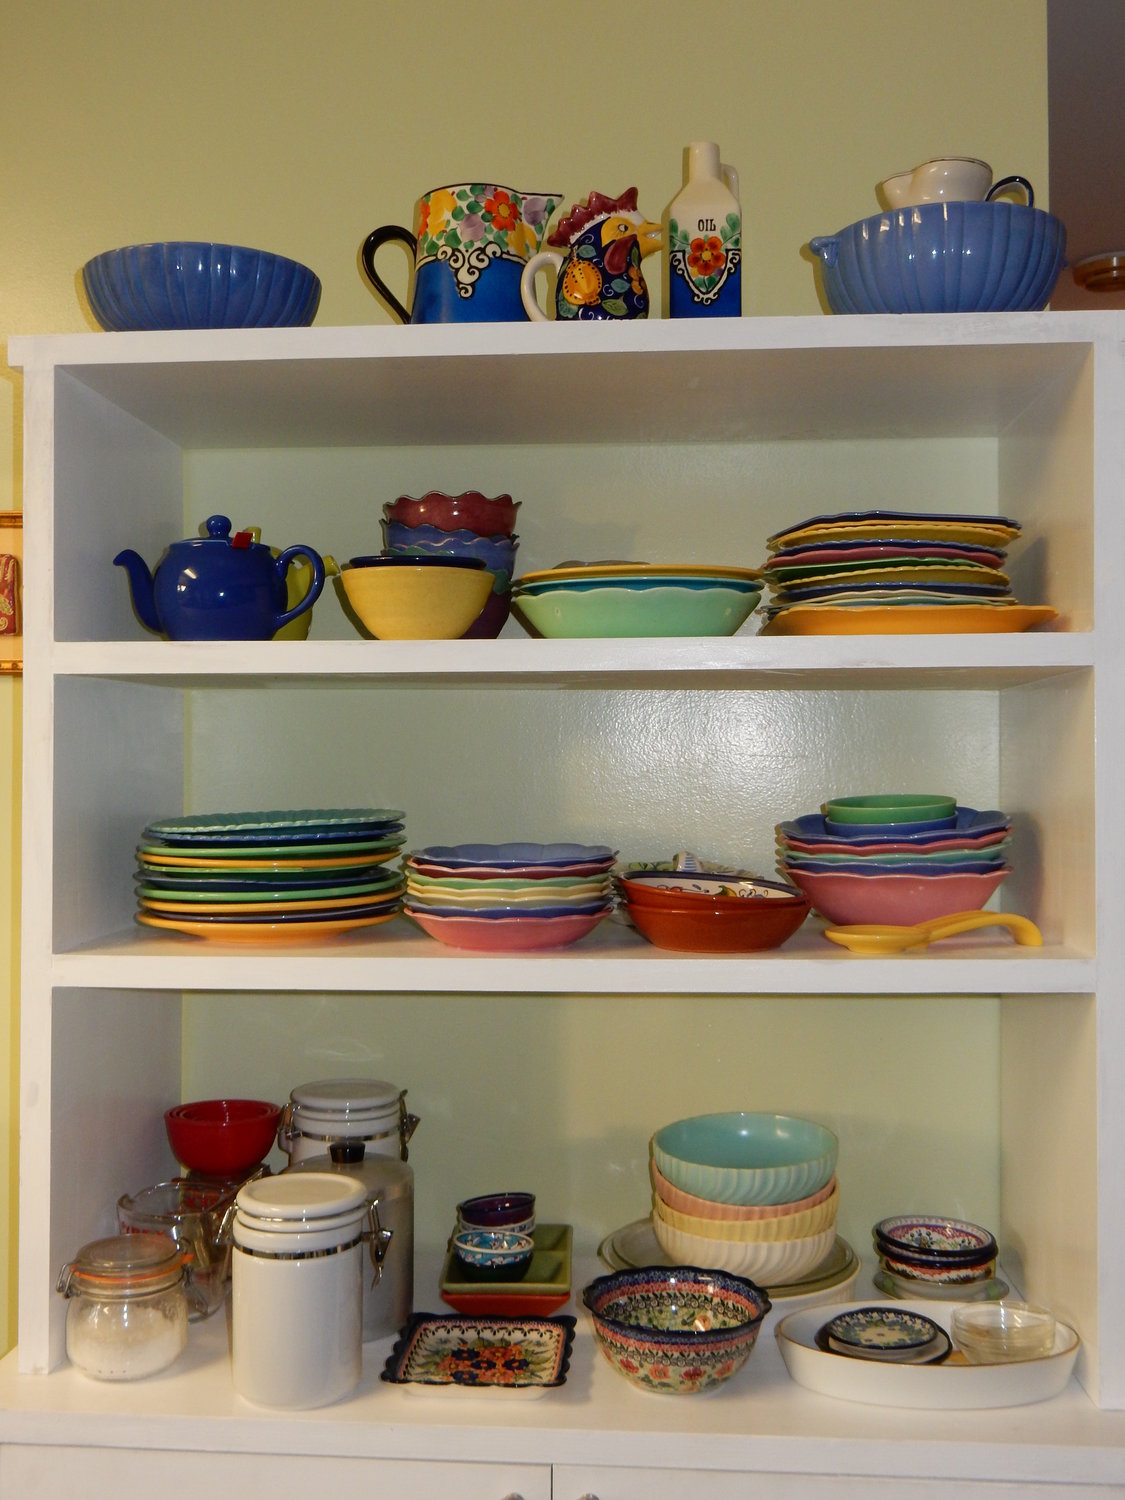 Dishes on shelves in kitchen.